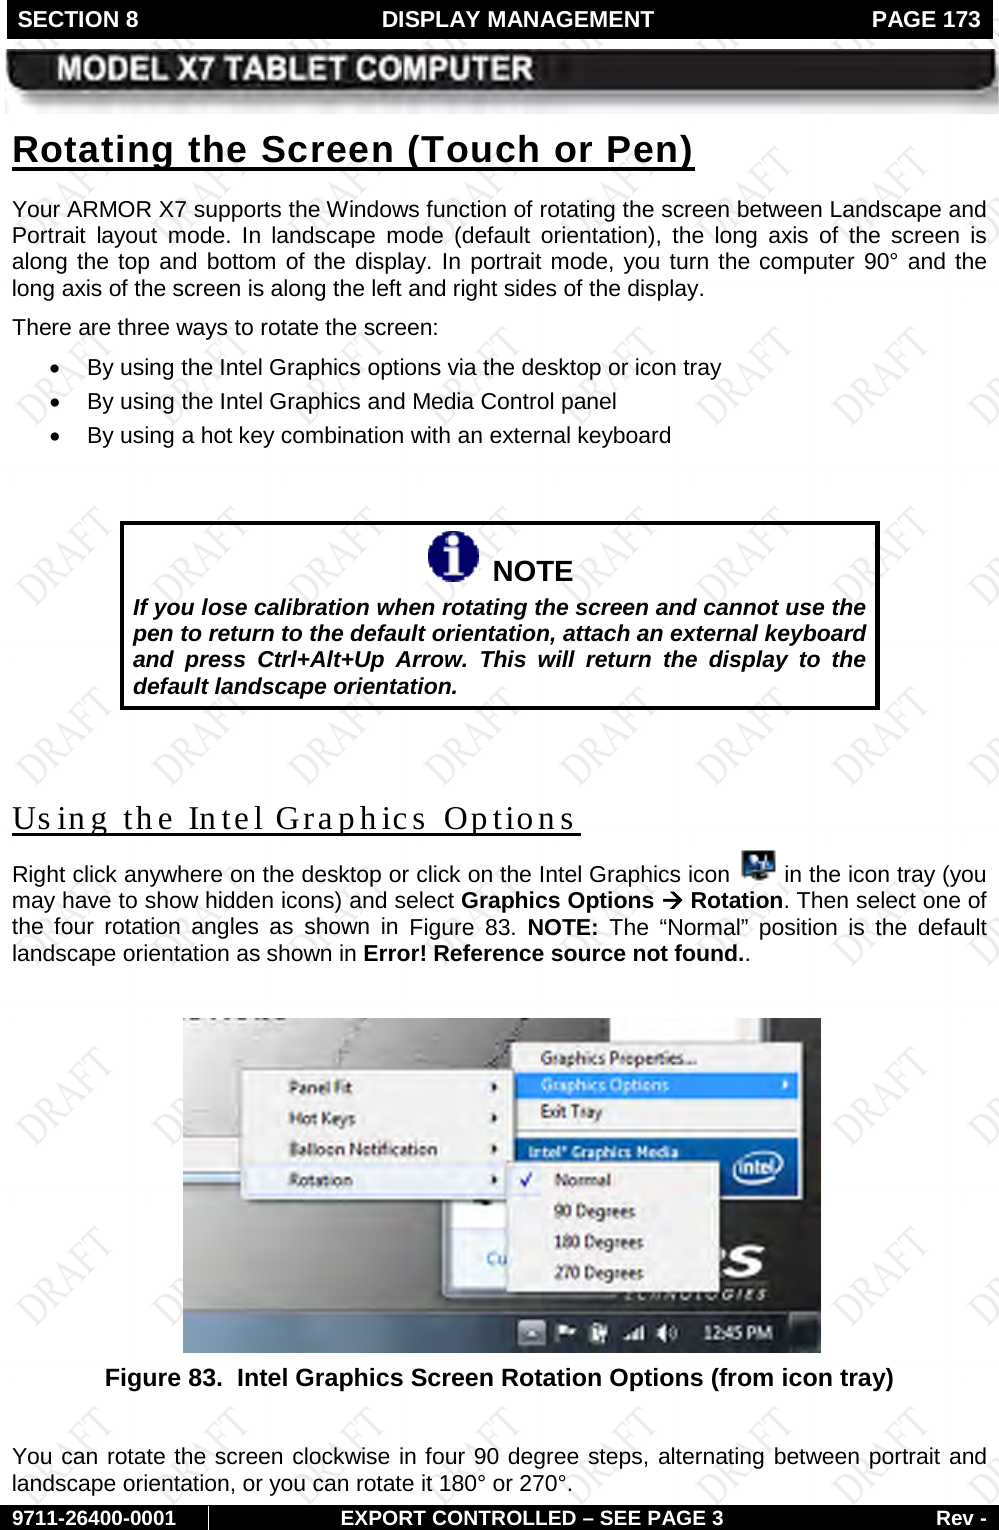 SECTION 8  DISPLAY MANAGEMENT  PAGE 173        9711-26400-0001 EXPORT CONTROLLED – SEE PAGE 3 Rev - Your ARMOR X7 supports the Windows function of rotating the screen between Landscape and Portrait layout mode.  In landscape mode (default orientation), the long axis of the screen is along the top and bottom of the display. In portrait mode, you turn the computer 90° and the long axis of the screen is along the left and right sides of the display.  Rotating the Screen (Touch or Pen) There are three ways to rotate the screen:  • By using the Intel Graphics options via the desktop or icon tray • By using the Intel Graphics and Media Control panel • By using a hot key combination with an external keyboard     NOTE If you lose calibration when rotating the screen and cannot use the pen to return to the default orientation, attach an external keyboard and press Ctrl+Alt+Up Arrow. This will return the display to the default landscape orientation.  Right click anywhere on the desktop or click on the Intel Graphics icon   in the icon tray (you may have to show hidden icons) and select Graphics Options à Rotation. Then select one of the four rotation angles as shown in Us ing the Intel Graphics Options Figure  83.  NOTE:  The “Normal” position is the default landscape orientation as shown in Error! Reference source not found..   Figure 83.  Intel Graphics Screen Rotation Options (from icon tray)  You can rotate the screen clockwise in four 90 degree steps, alternating between portrait and landscape orientation, or you can rotate it 180° or 270°. 